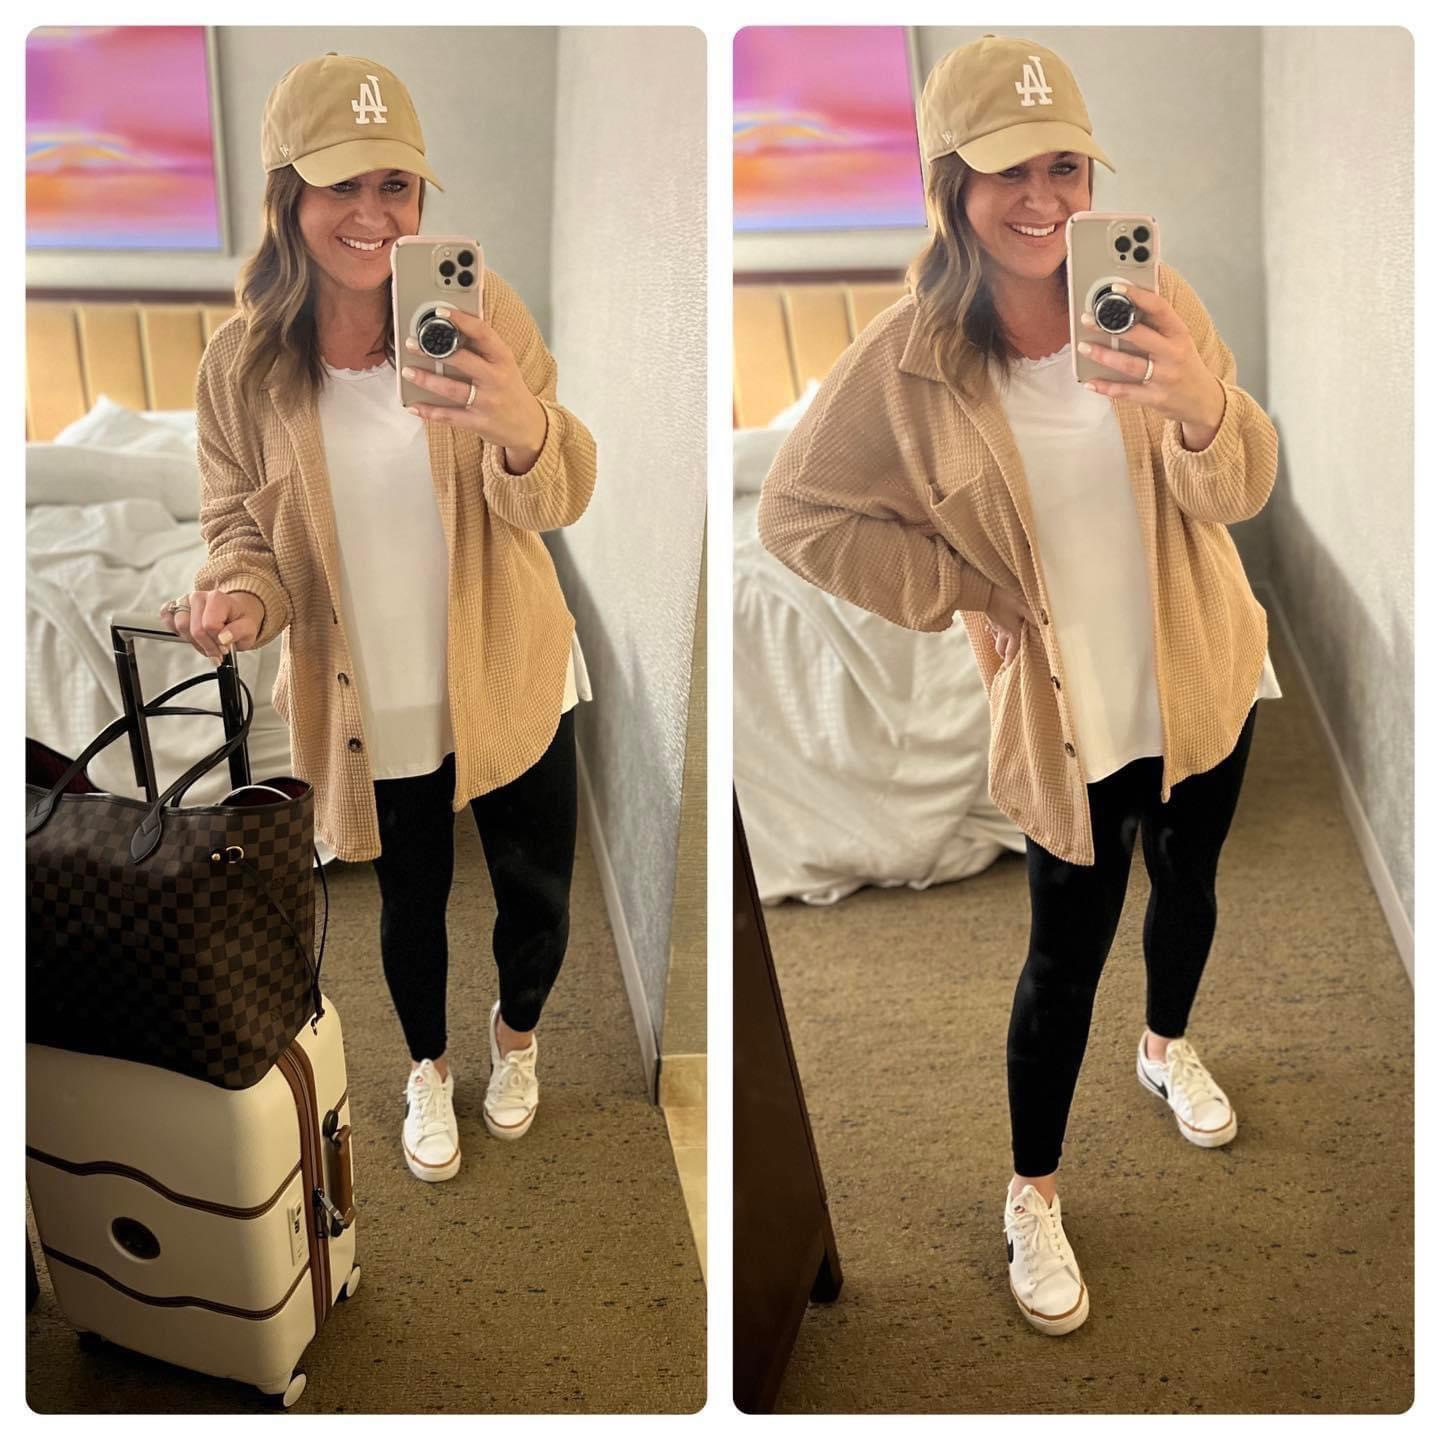 Stylish and Comfortable: Travel Outfit Ideas & Must Haves for Your Next Adventure

travel, travel outfit, vacation, vacation outfit, casual outfit, summer vacation, spring vacation, spring outfit, white sneakers, leggings, cardigan